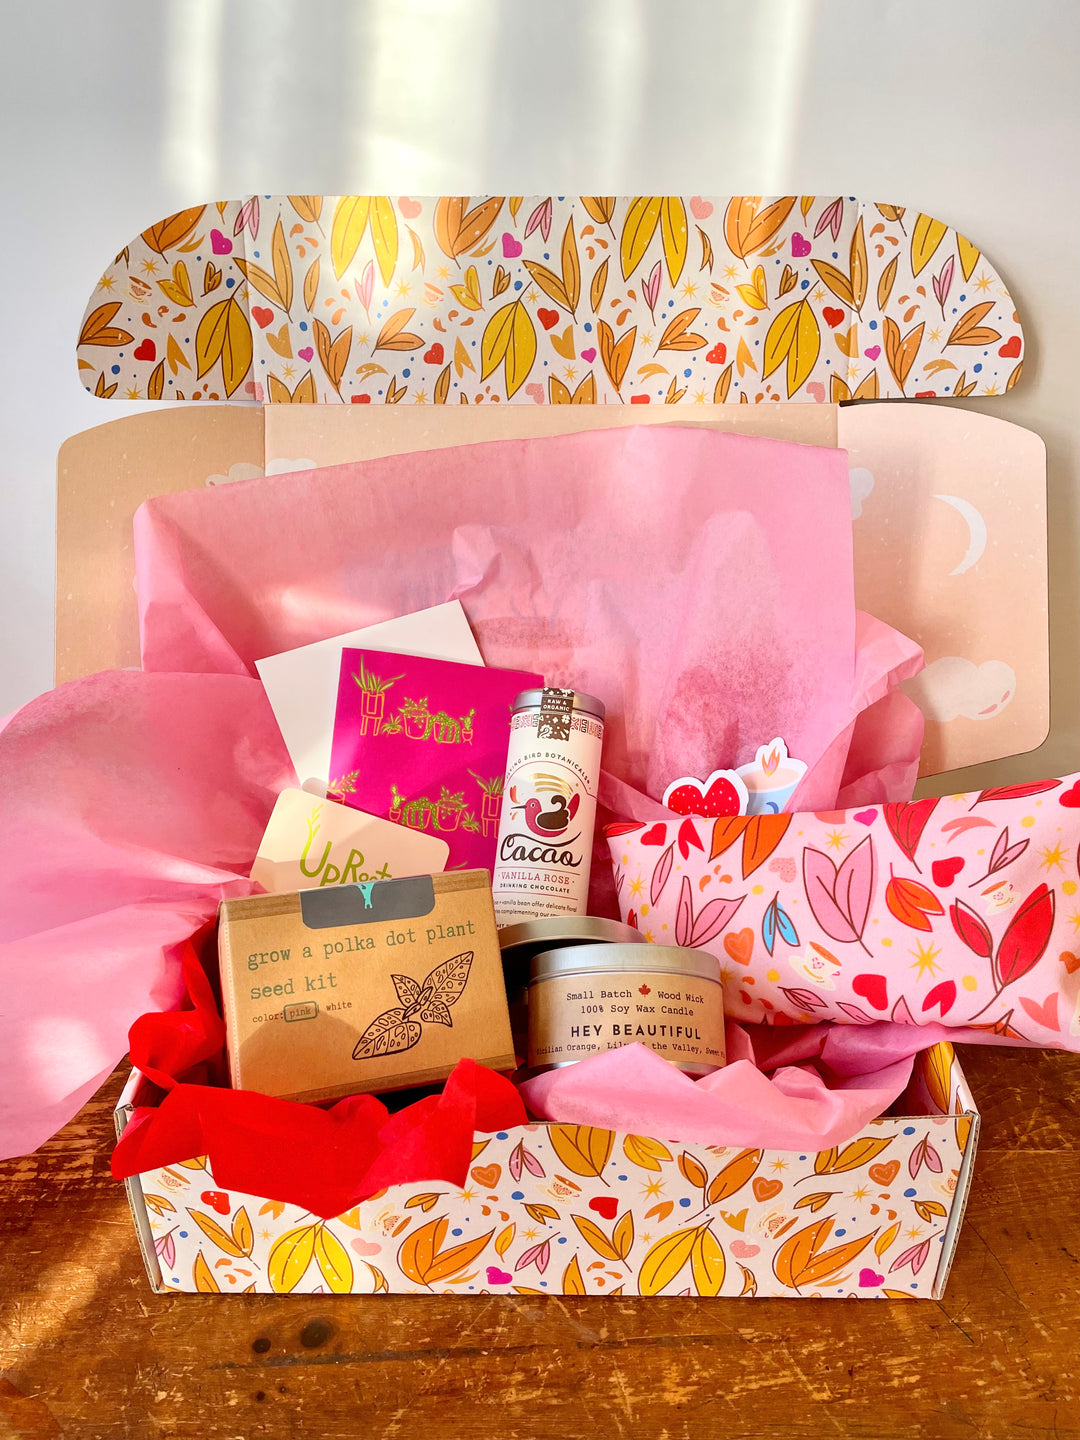 "Cherish" Gift Box: Eye Pillow, Vanilla Hot Chocolate, Soy Candle, Greeting Card, Pink Polka-Dot Plant Kit, Plant Mom Tote, Stickers (Love in Bloom)